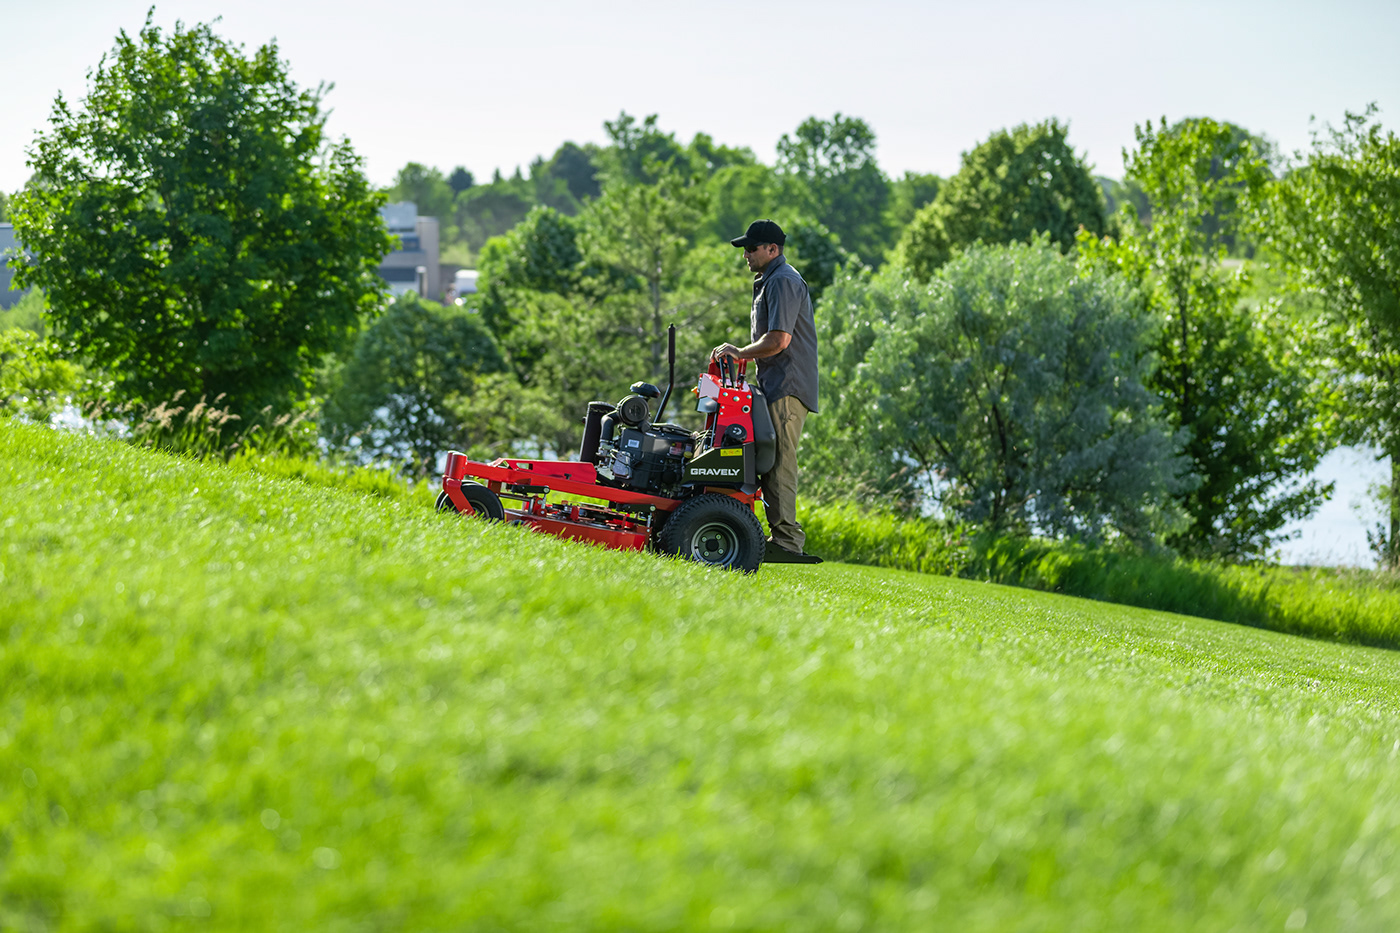 Advertising  commercial media photographer Photography  photoshoot Product Photography landscaping lawn mower